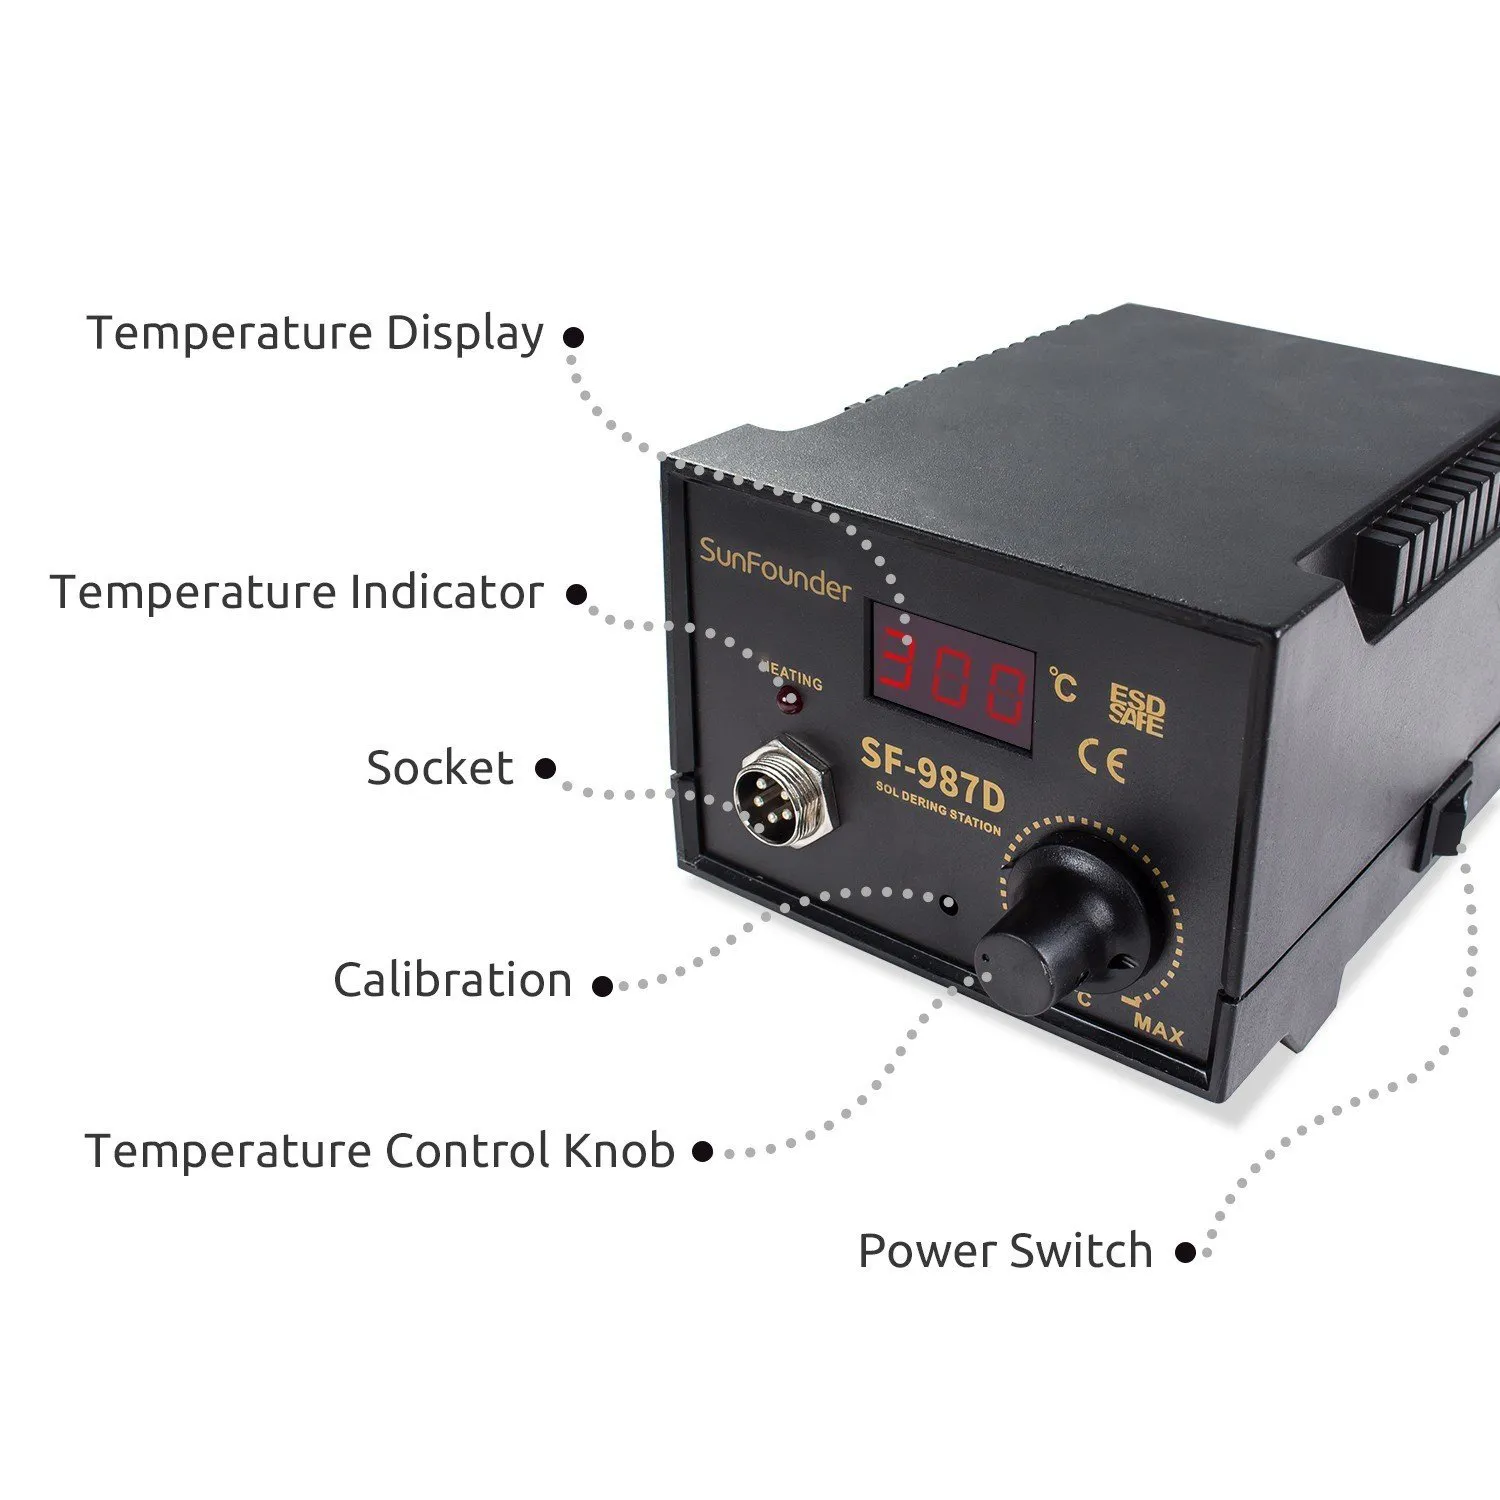 Photo of SunFounder SF-987D 500℃ Adjustable LED Display Temperature Thermostat Soldering Station Kit